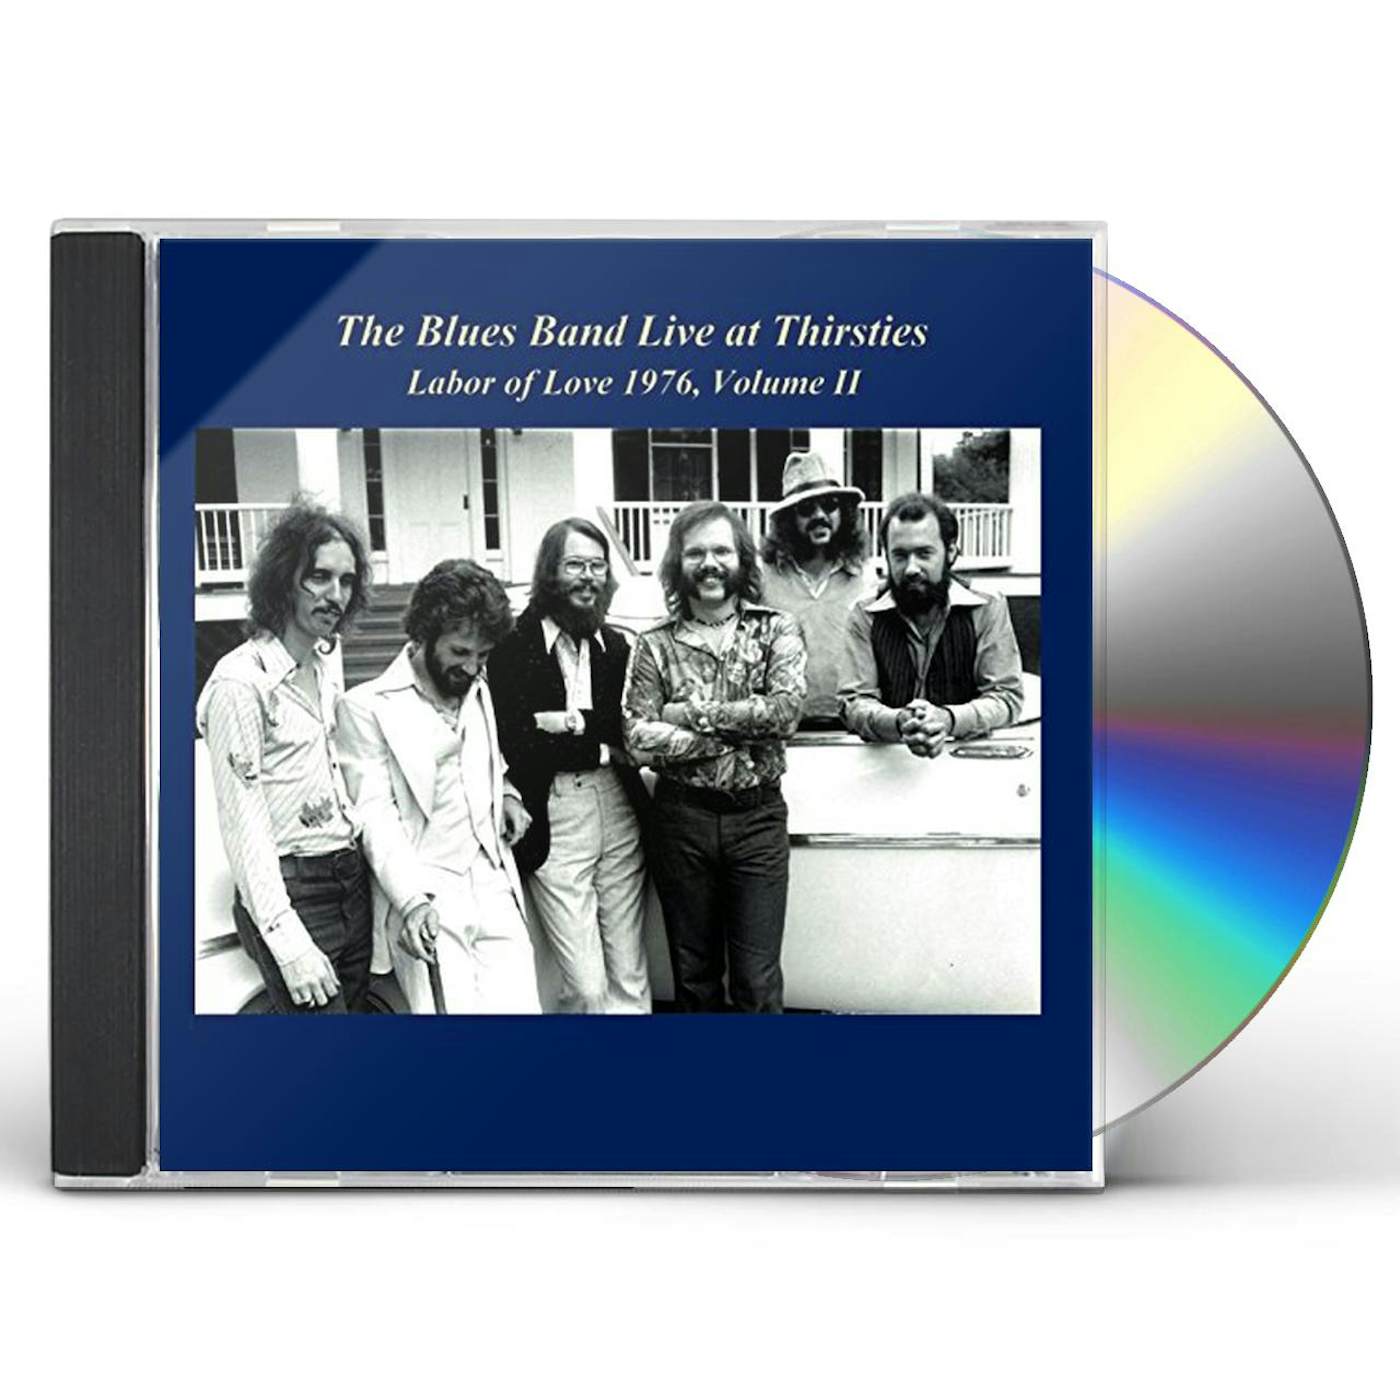 The Blues Band LIVE AT THIRSTIES & LABOR OF LOVE 1976 II CD